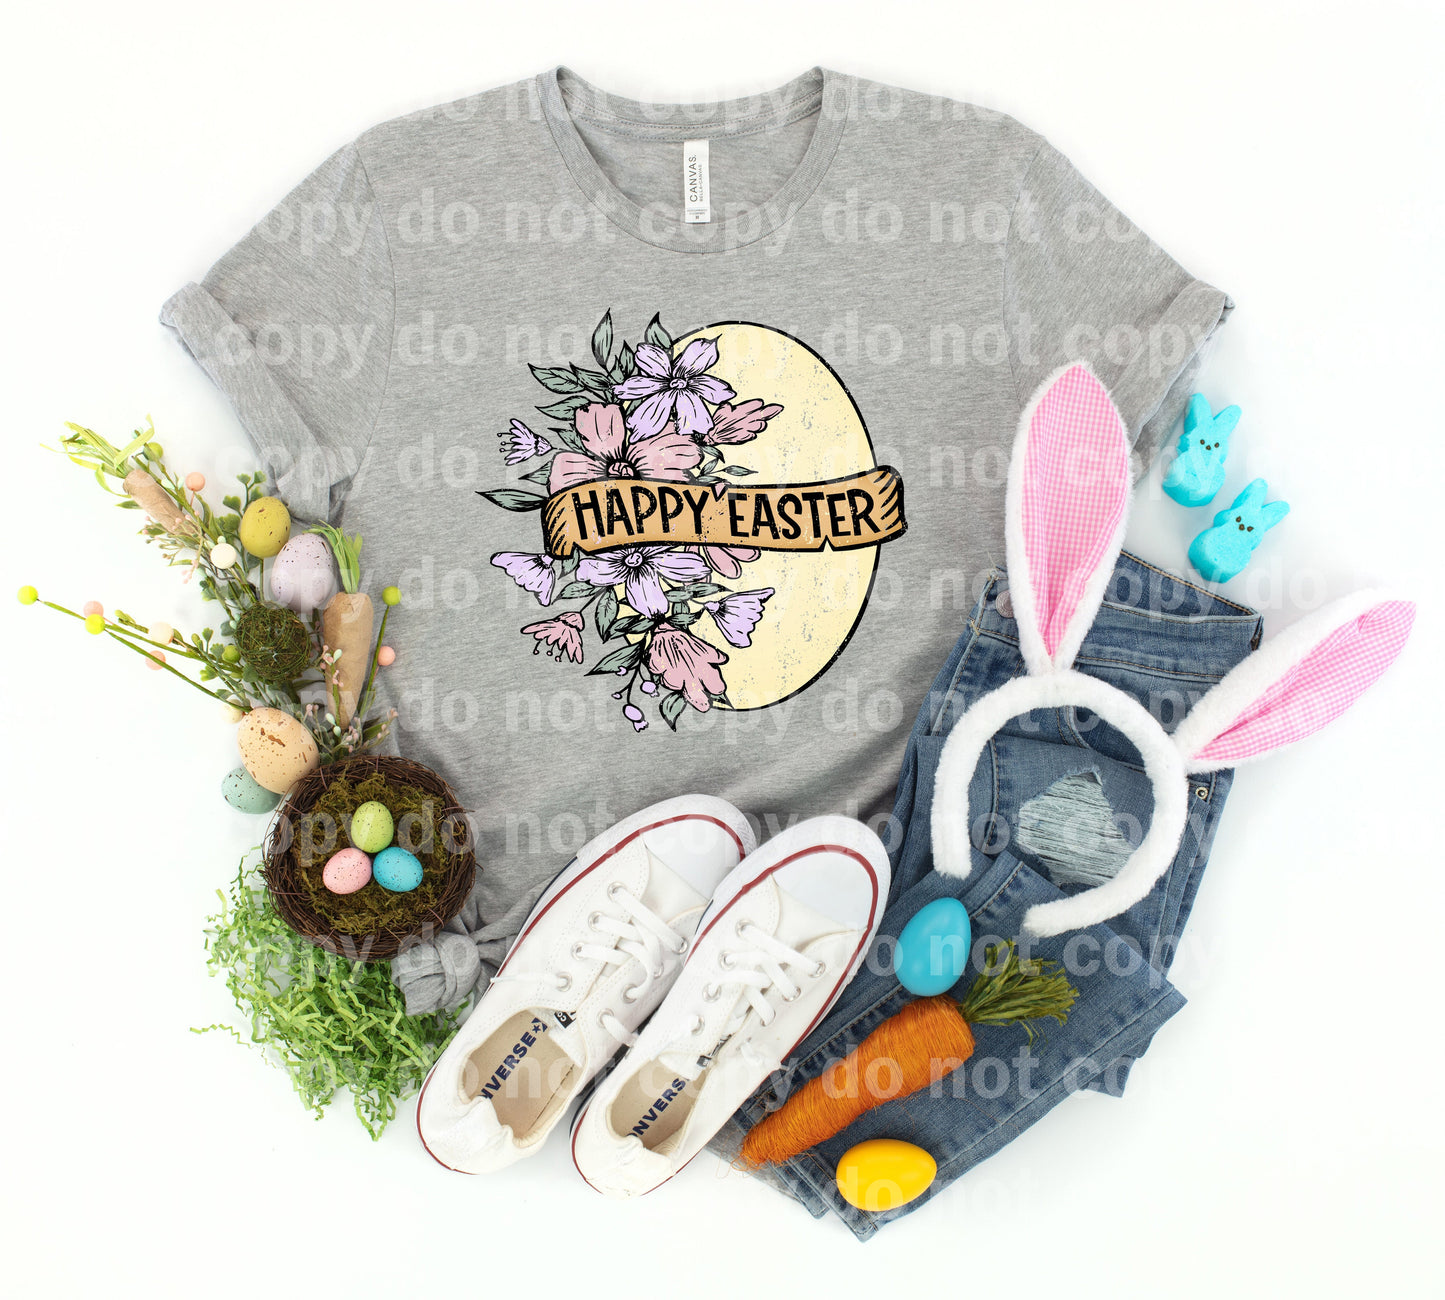 Happy Easter Flower Egg Distressed Full Color/One Color Dream Print or Sublimation Print